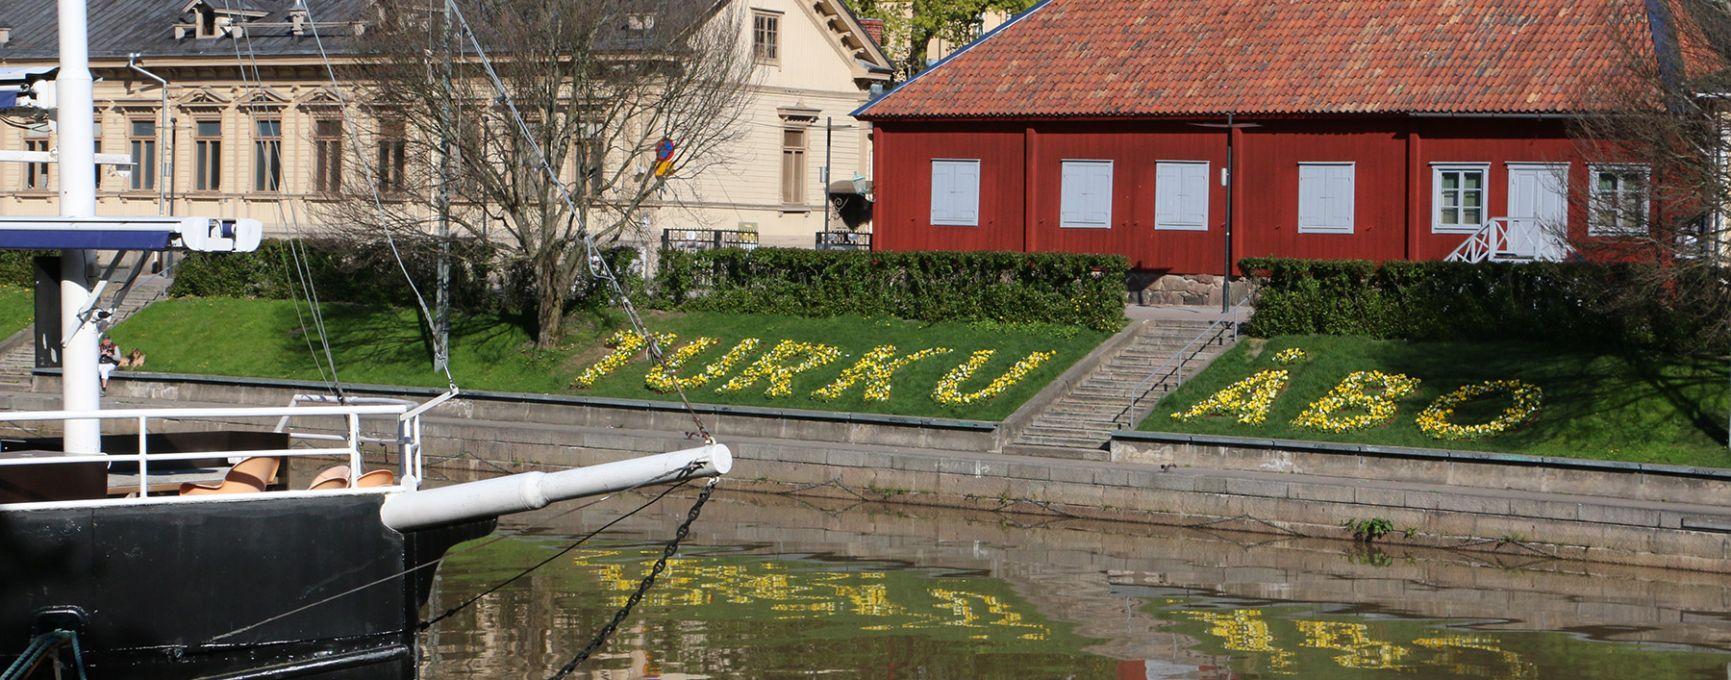 Spring flowers spell out Turku and Åbo on the banks of the Aura River.